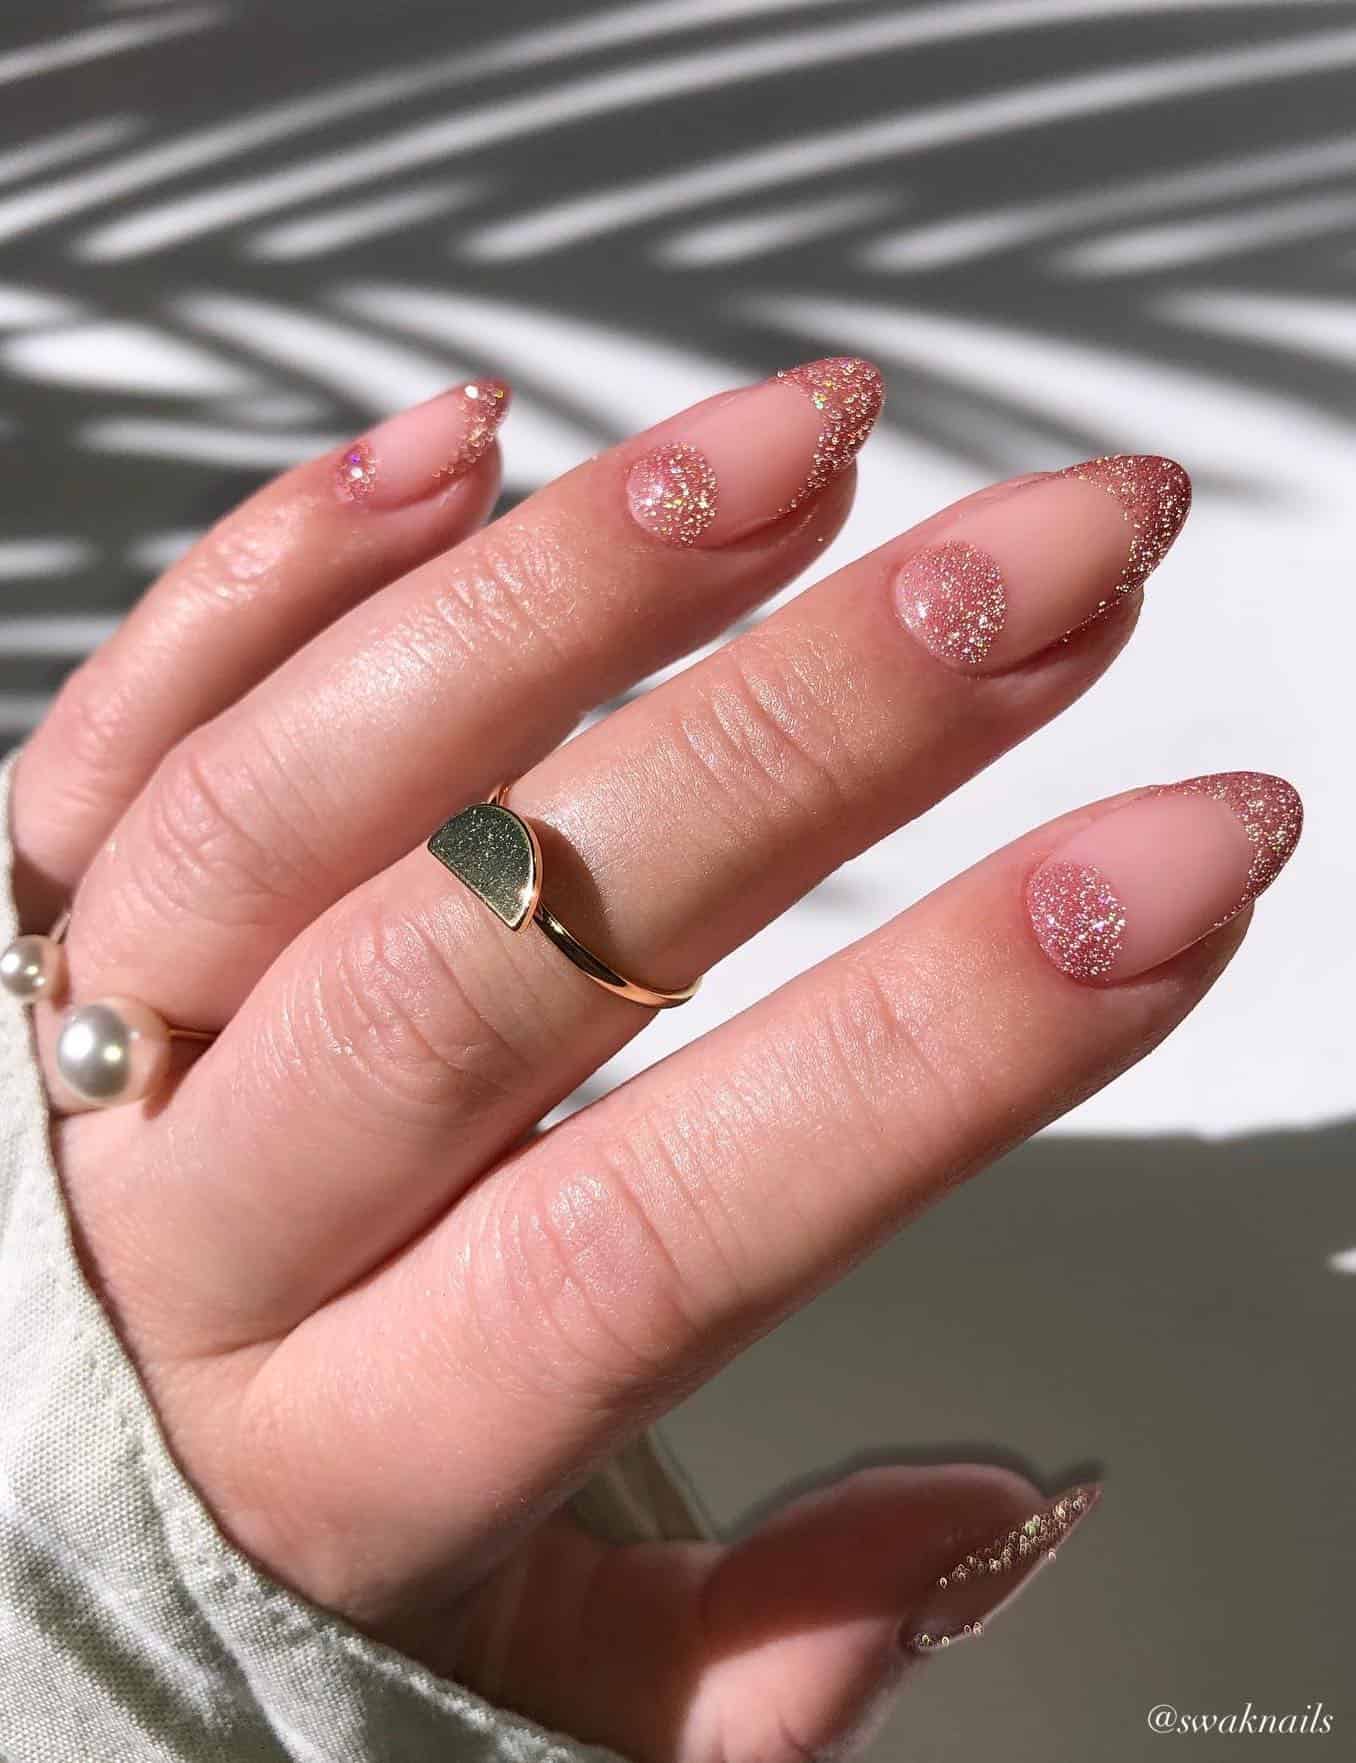 A hand with nude almond nails featuring French tips and half moon accents in a shimmering pink polish